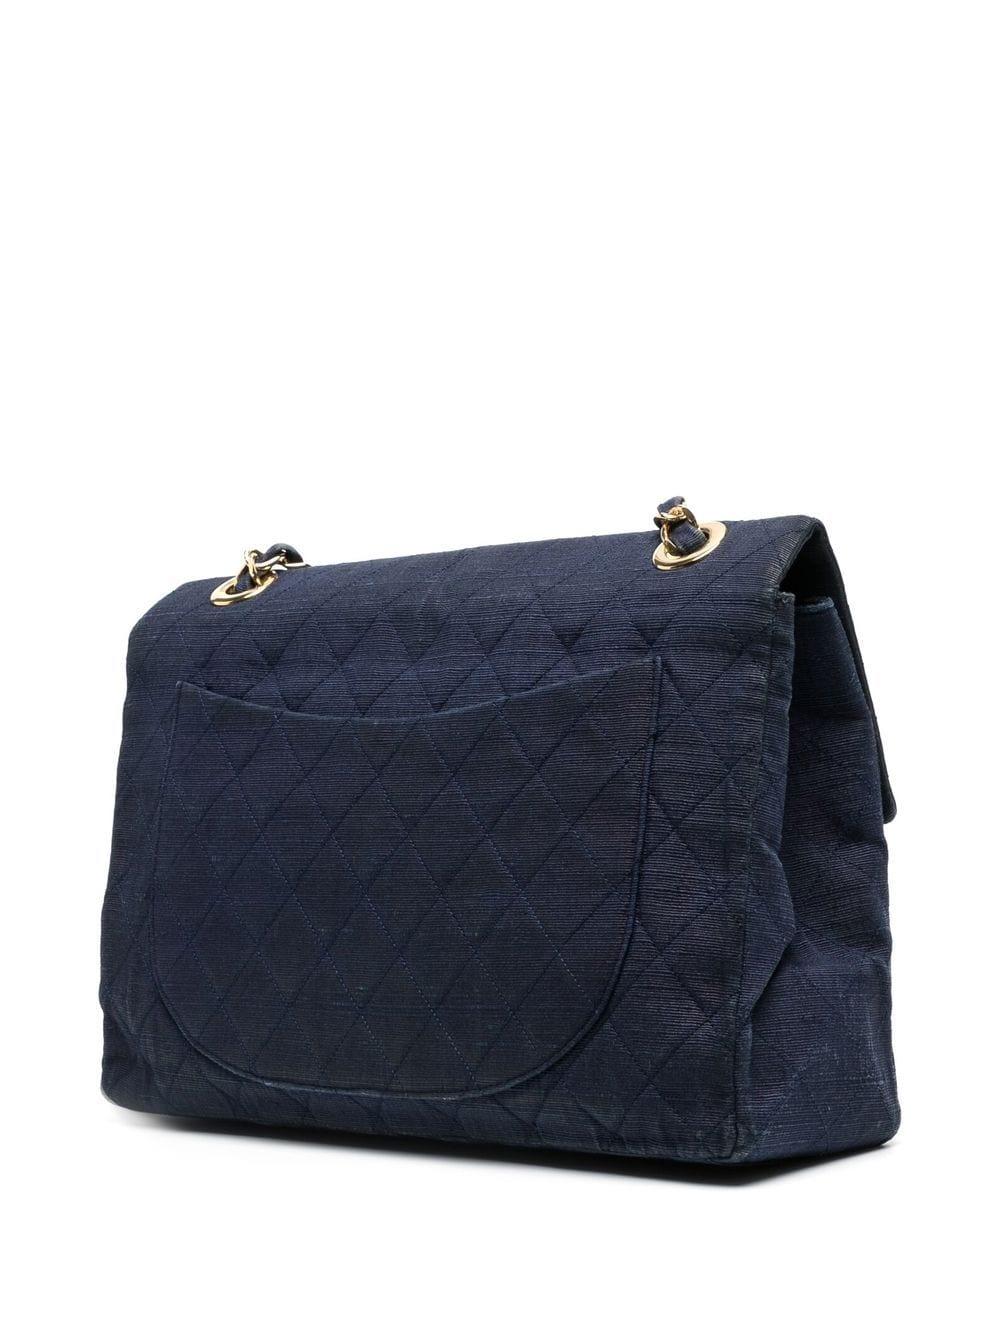 This rare vintage Maxi Flap bag from 1991-1994 has been crafted from dark navy cotton canvas for a more casual and practical look. Designed with the Maisons signature diamond quilting and CC logo, the bag features a large leather-lined main